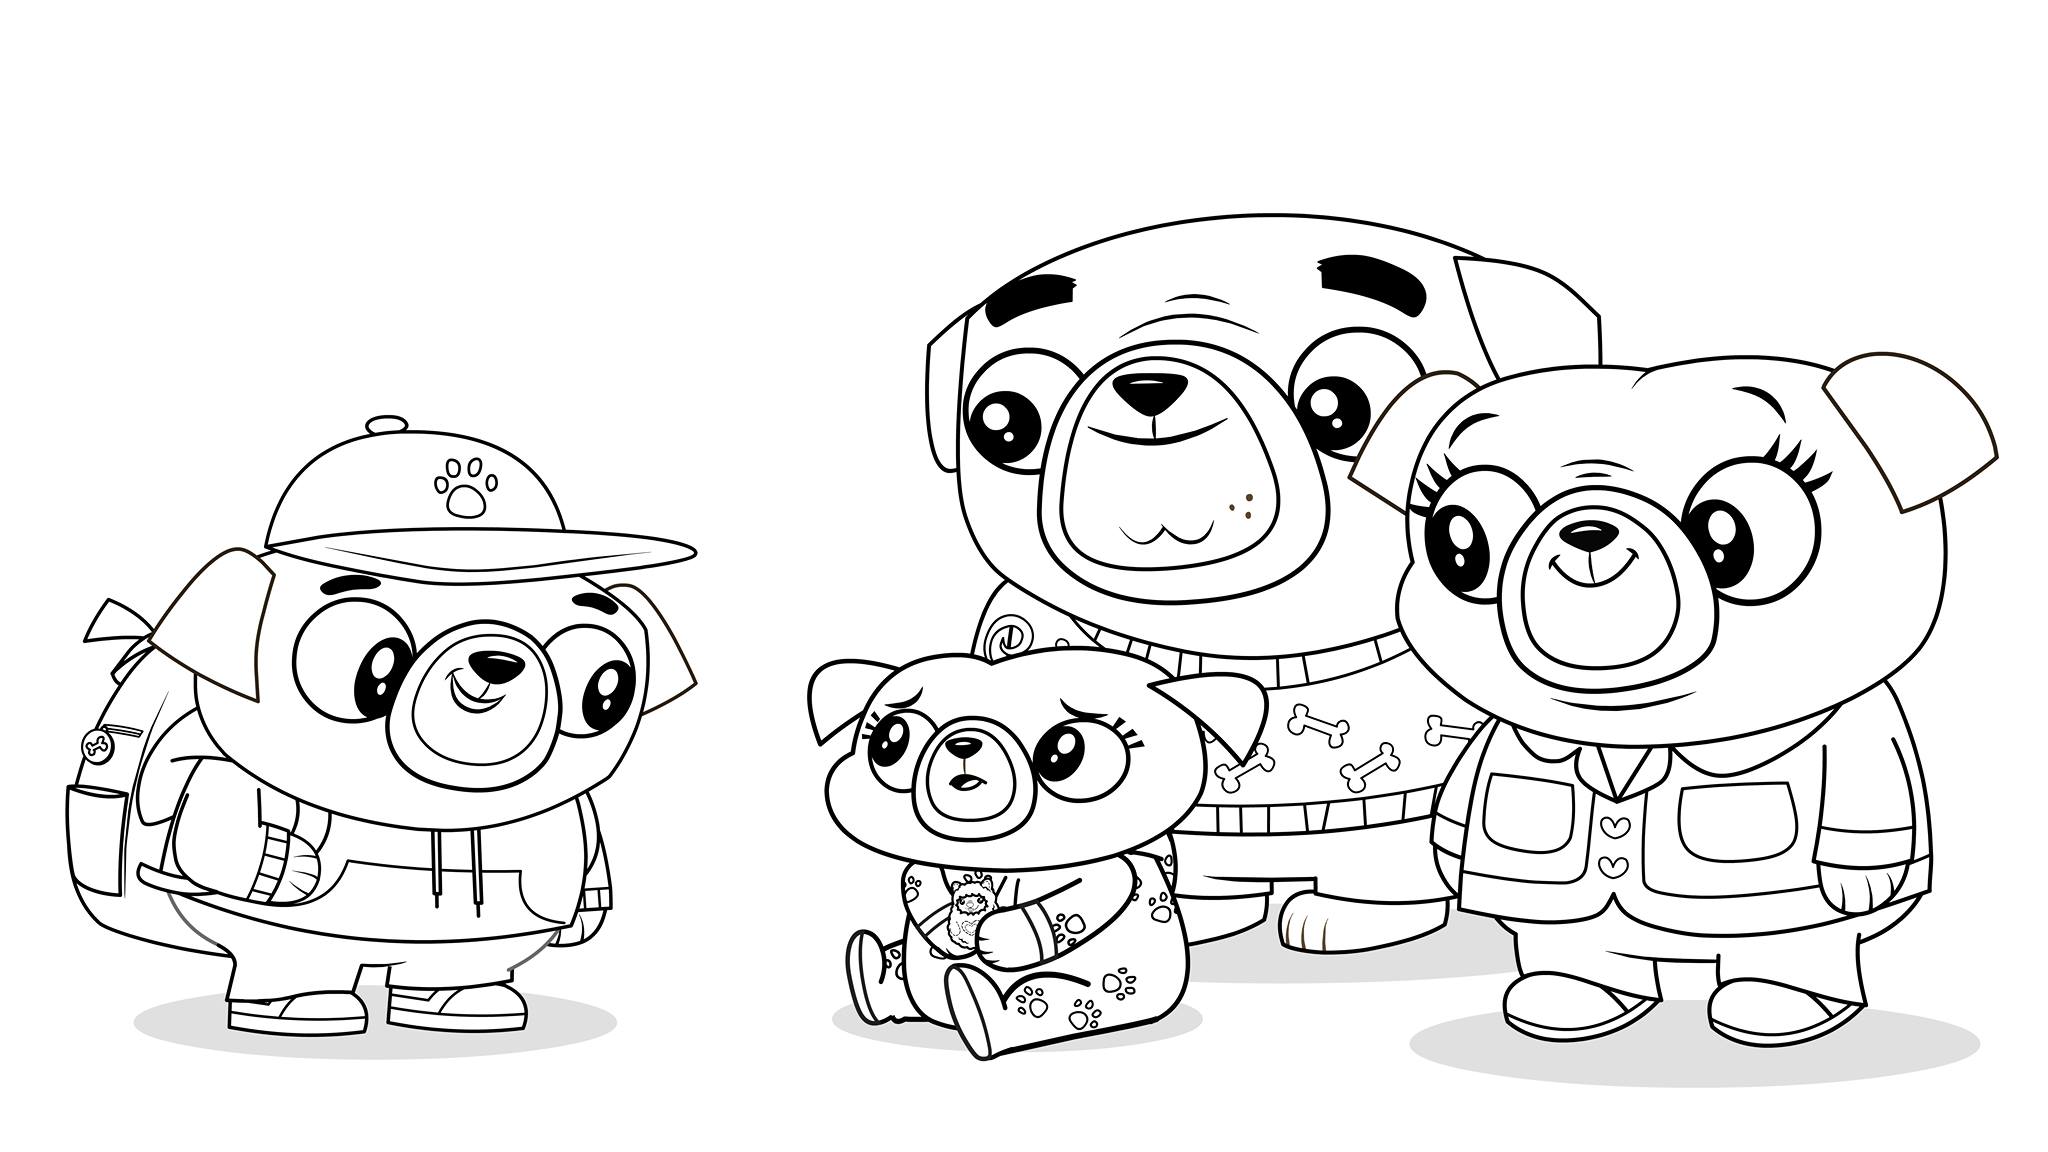 Chip and Family Colouring Sheet